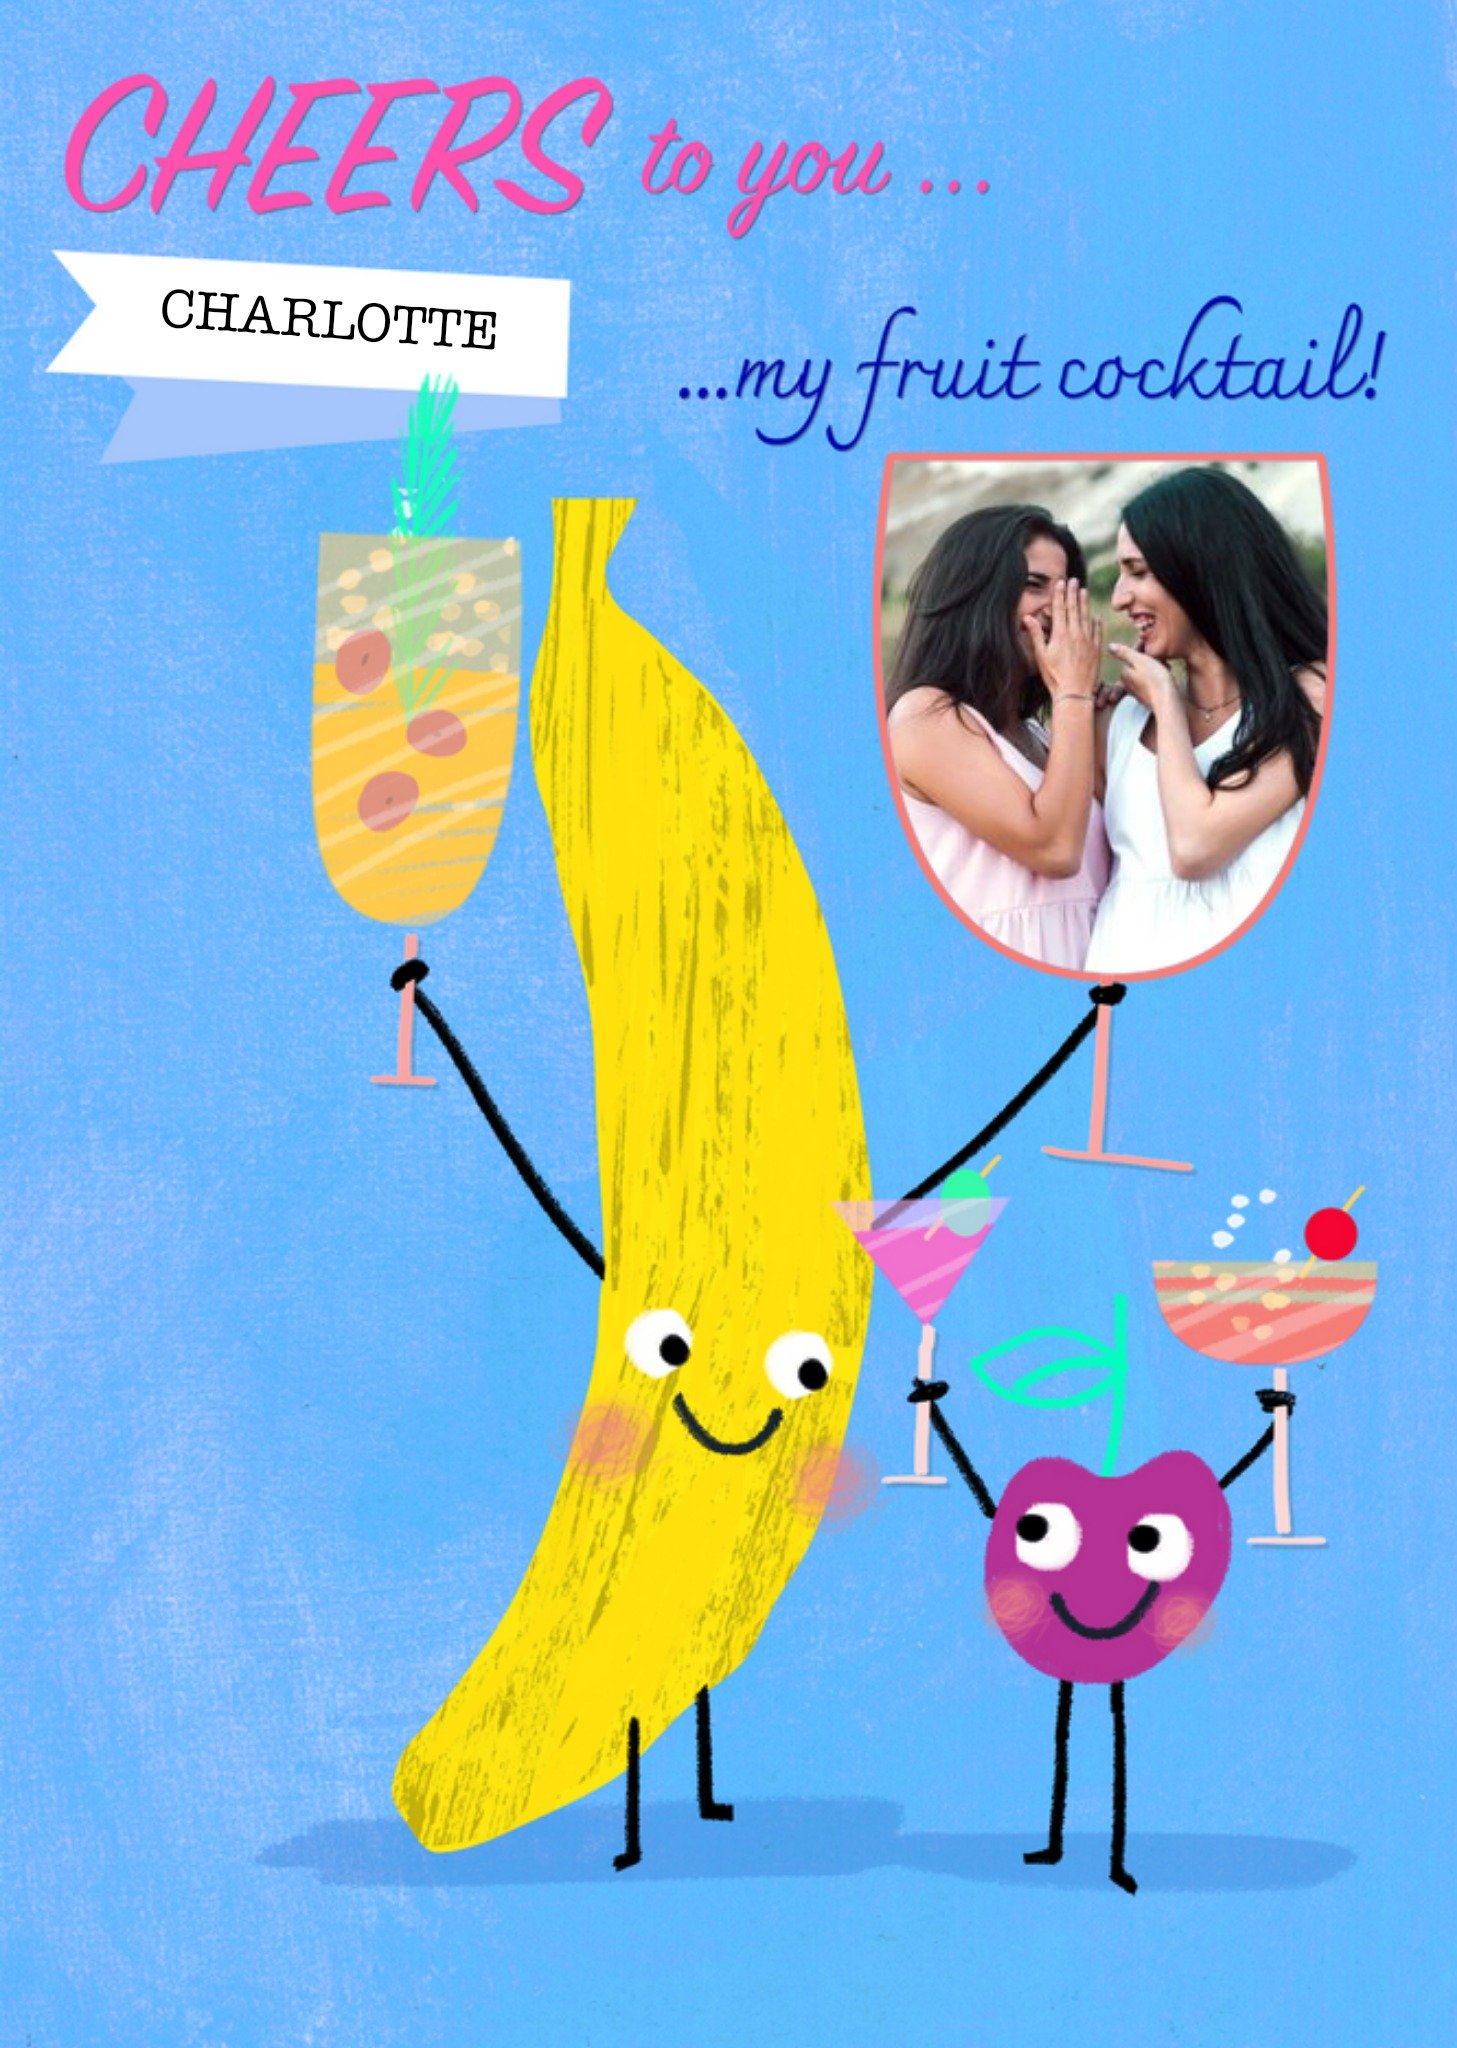 Moonpig Fun Illustrated Fruit Cocktails And Cheers Card By Elaine Field Ecard